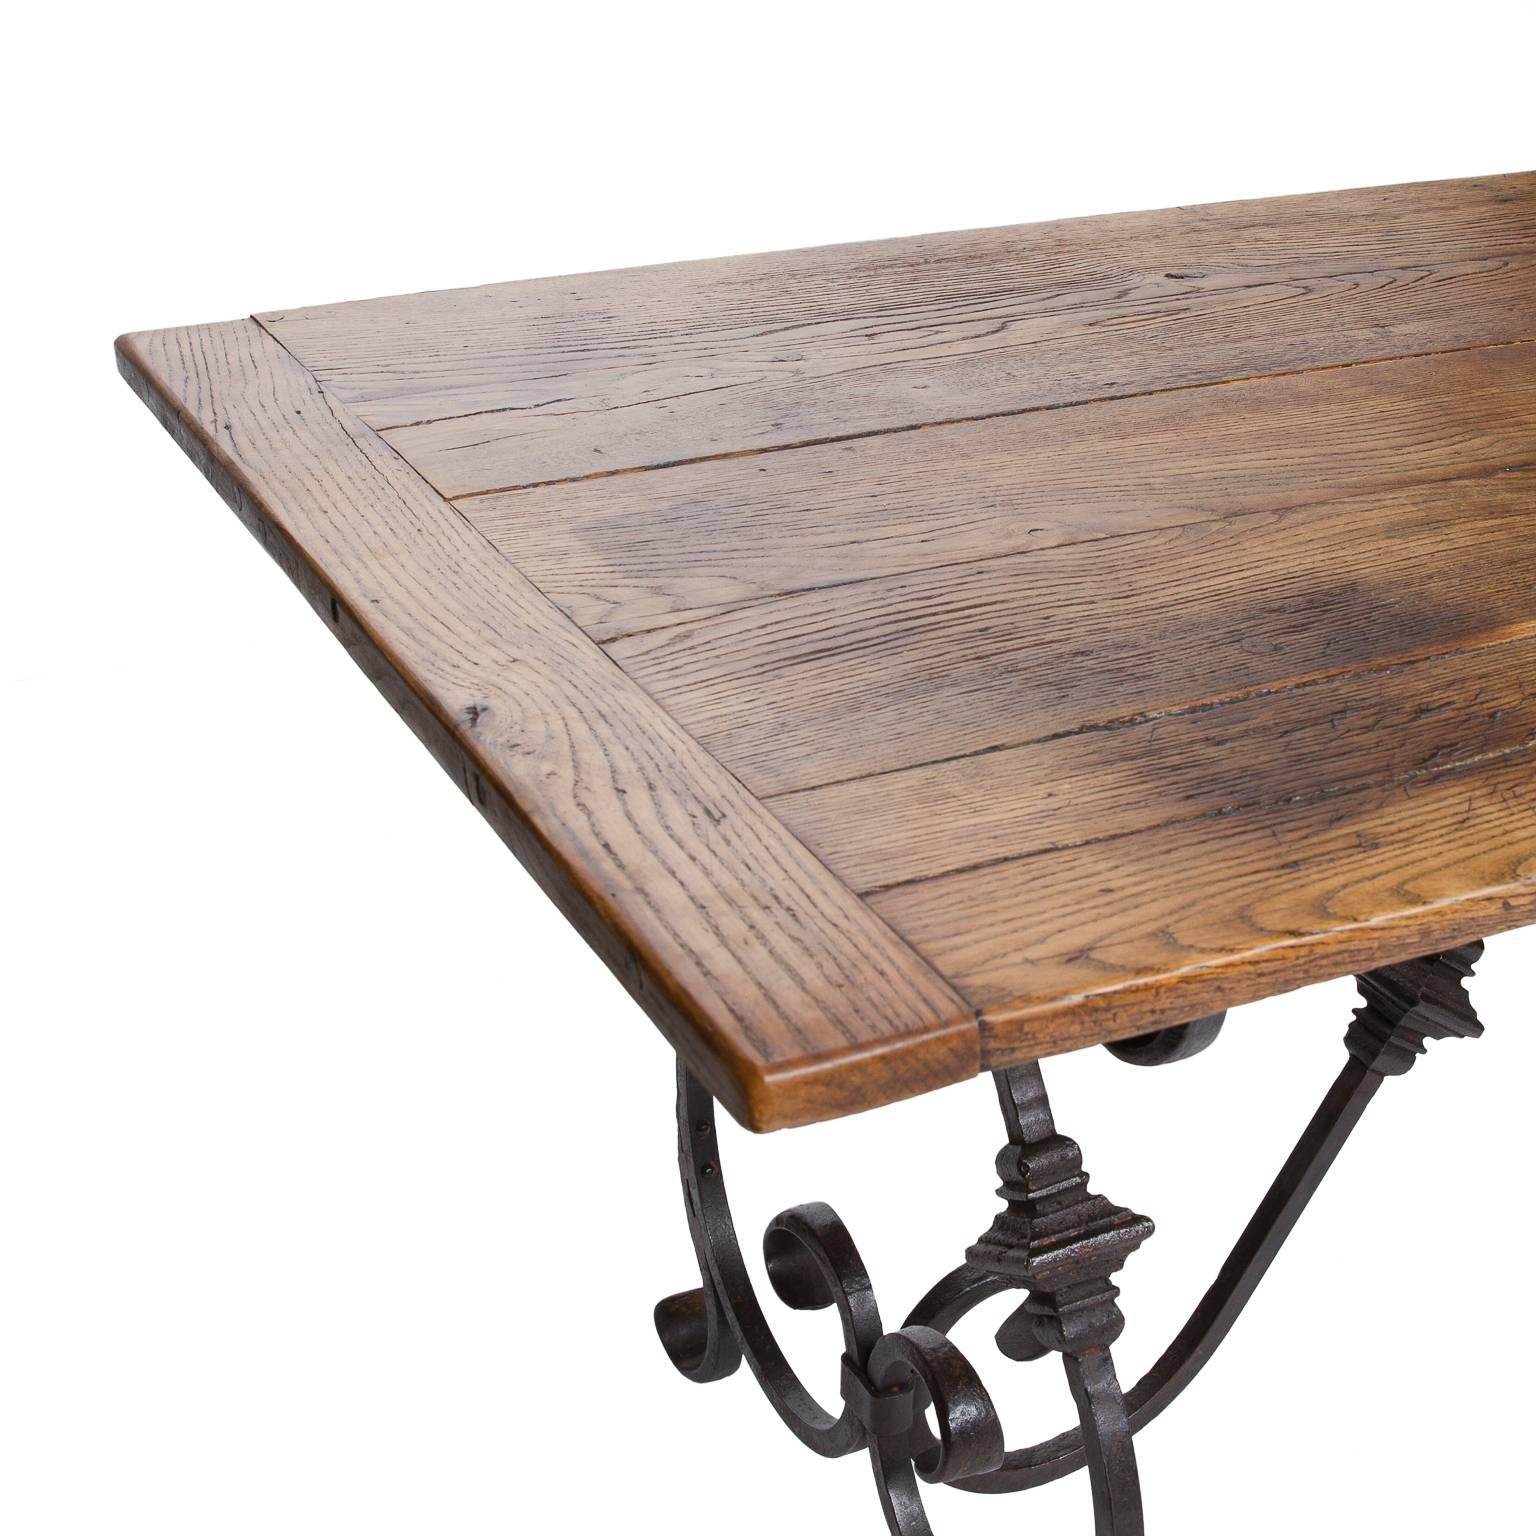 A fantastic iron base dining table from England. The top which is made of reclaimed timber accents the base. This table was made from two other antique tables which were combined to create an outstanding dining table. Top is from the late 19th